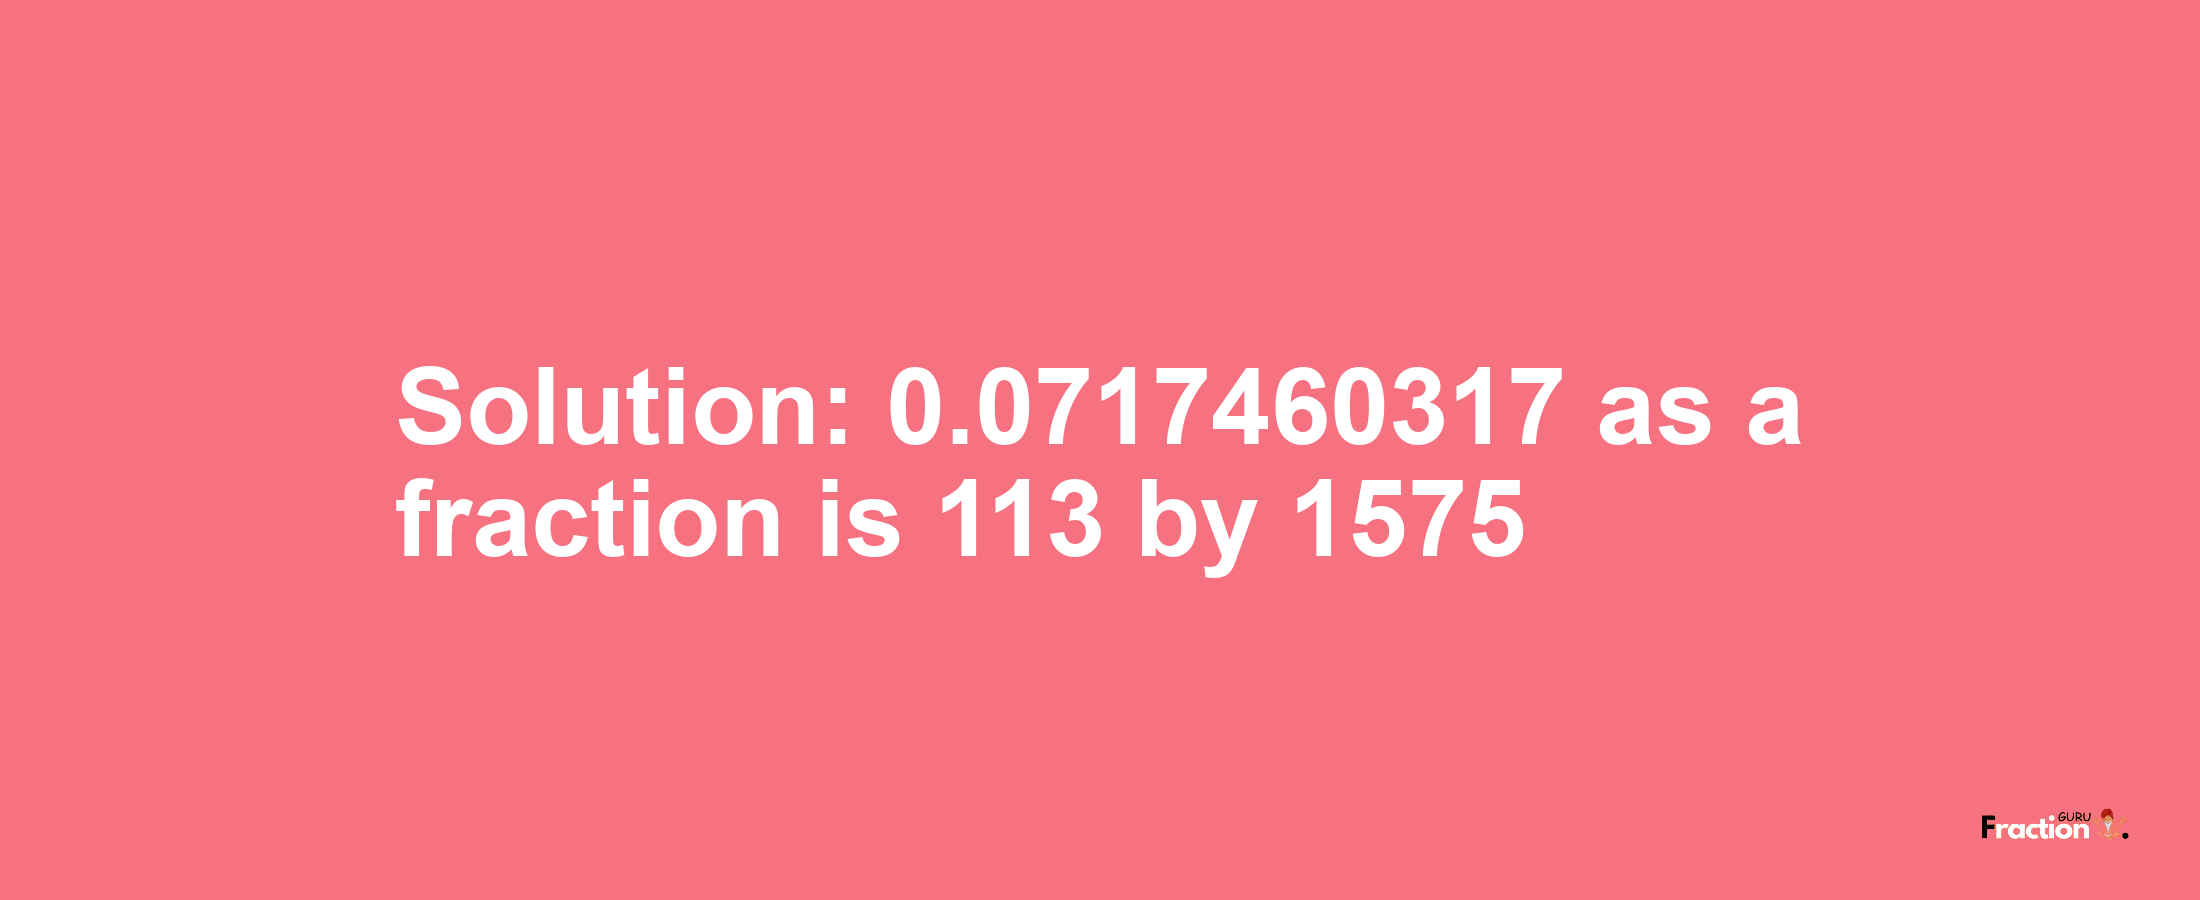 Solution:0.0717460317 as a fraction is 113/1575